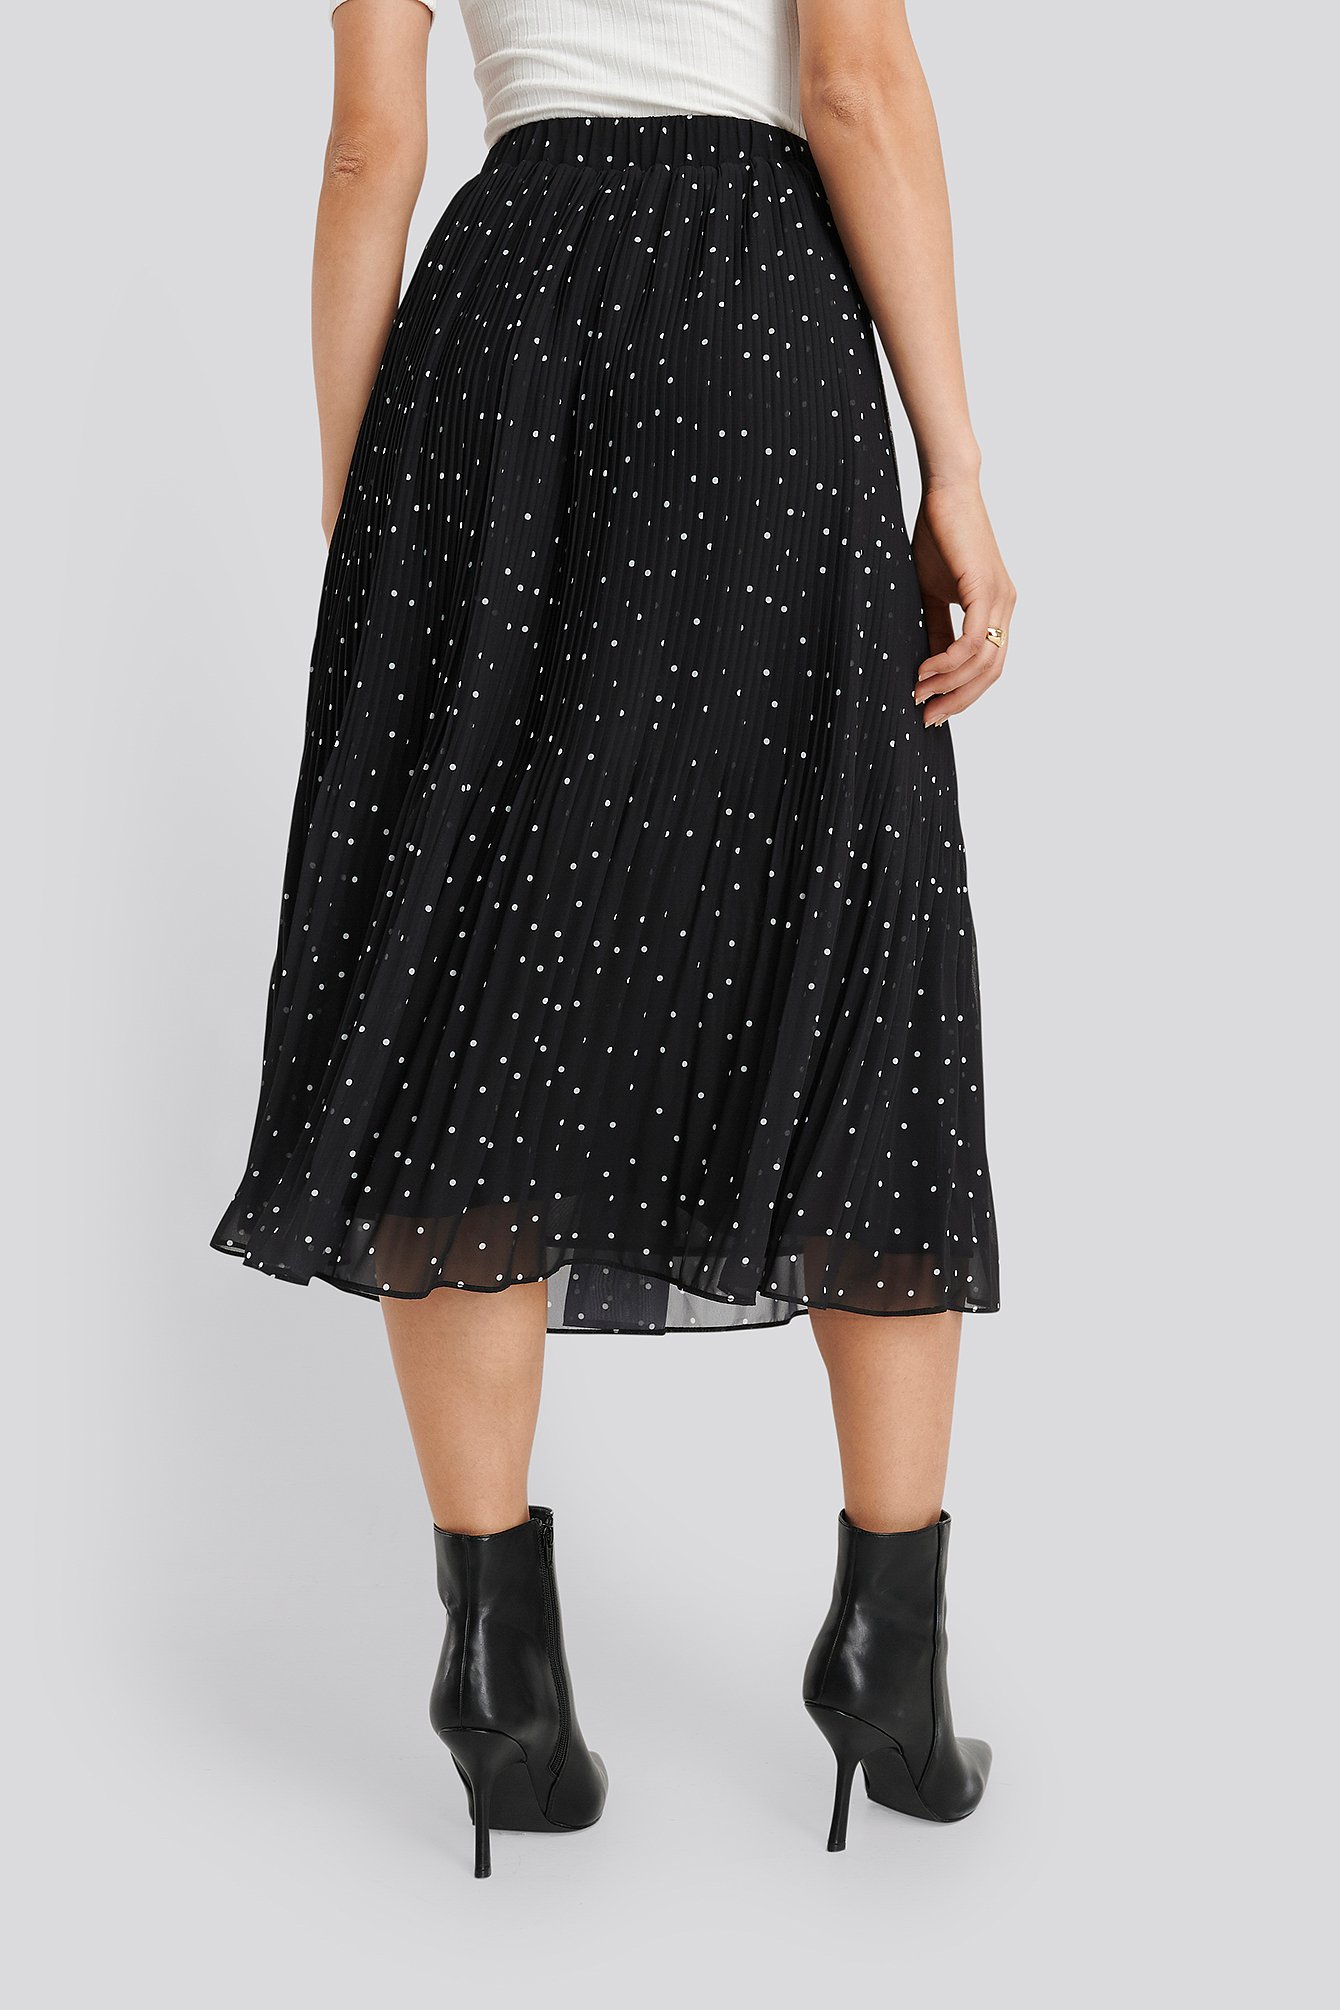 Black Pleated Dotted Skirt